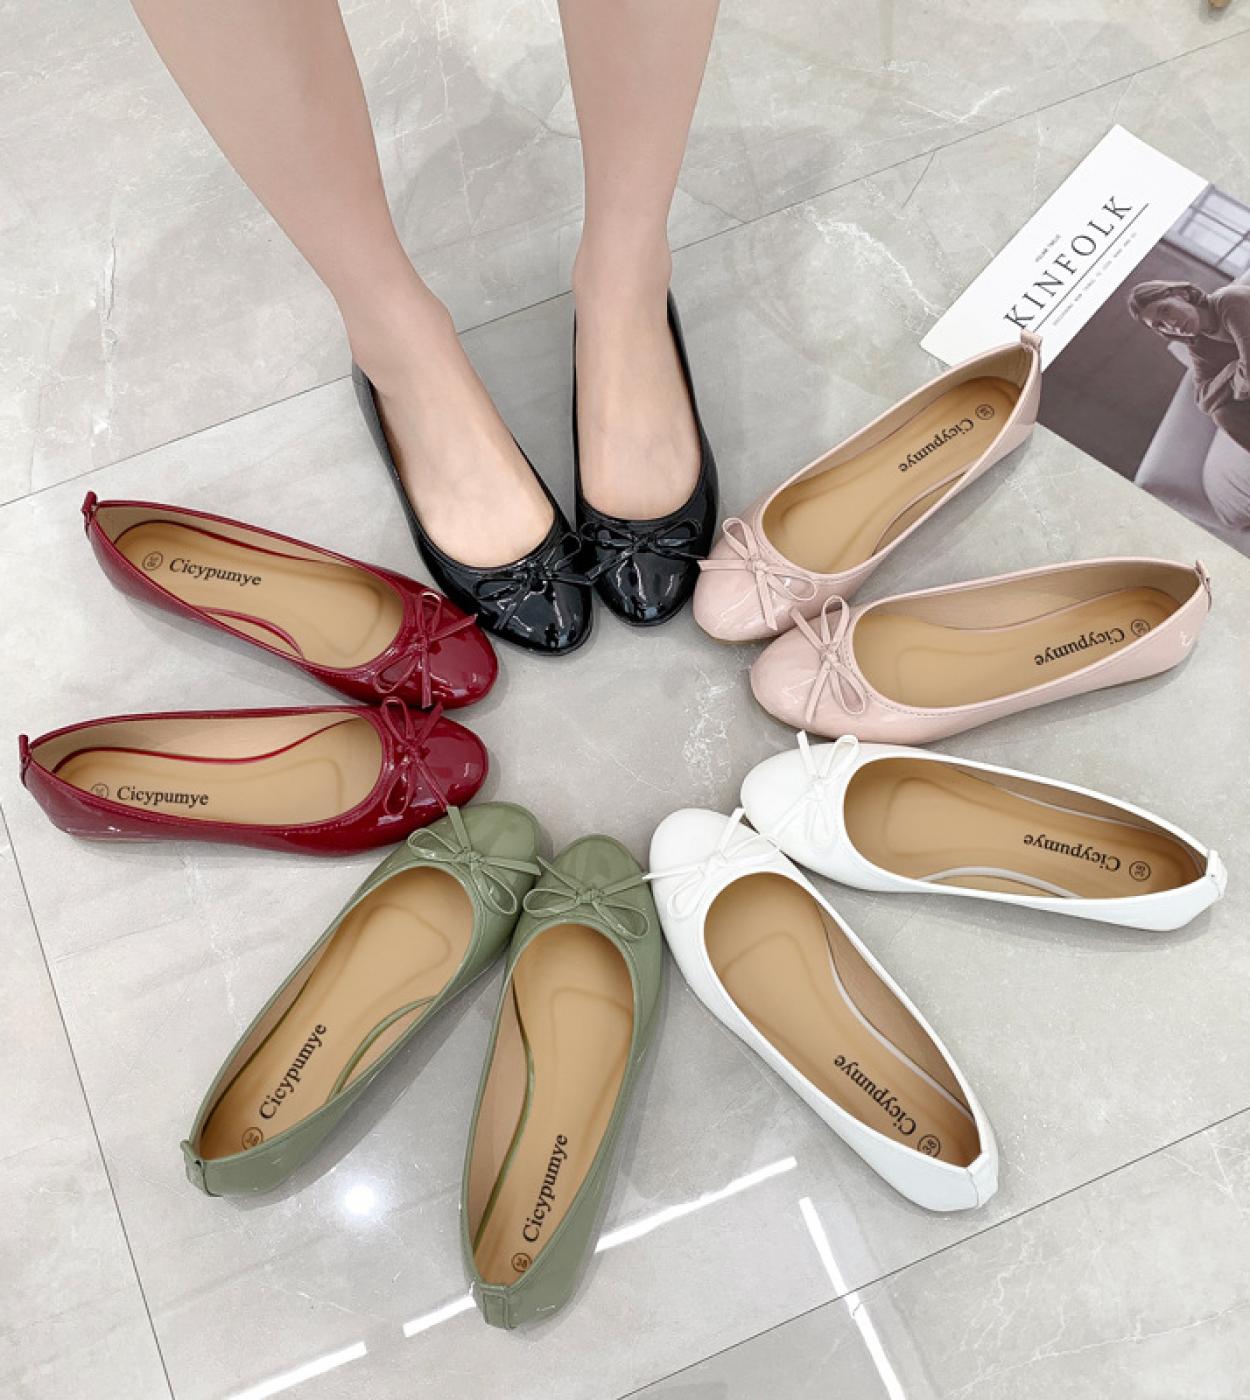 Solid Color Flat Shoes Women Ballerinas Round Toe Bowtie Slip On Ballet Flats Lazy Loafers Moccasins Ladies Casual Flats